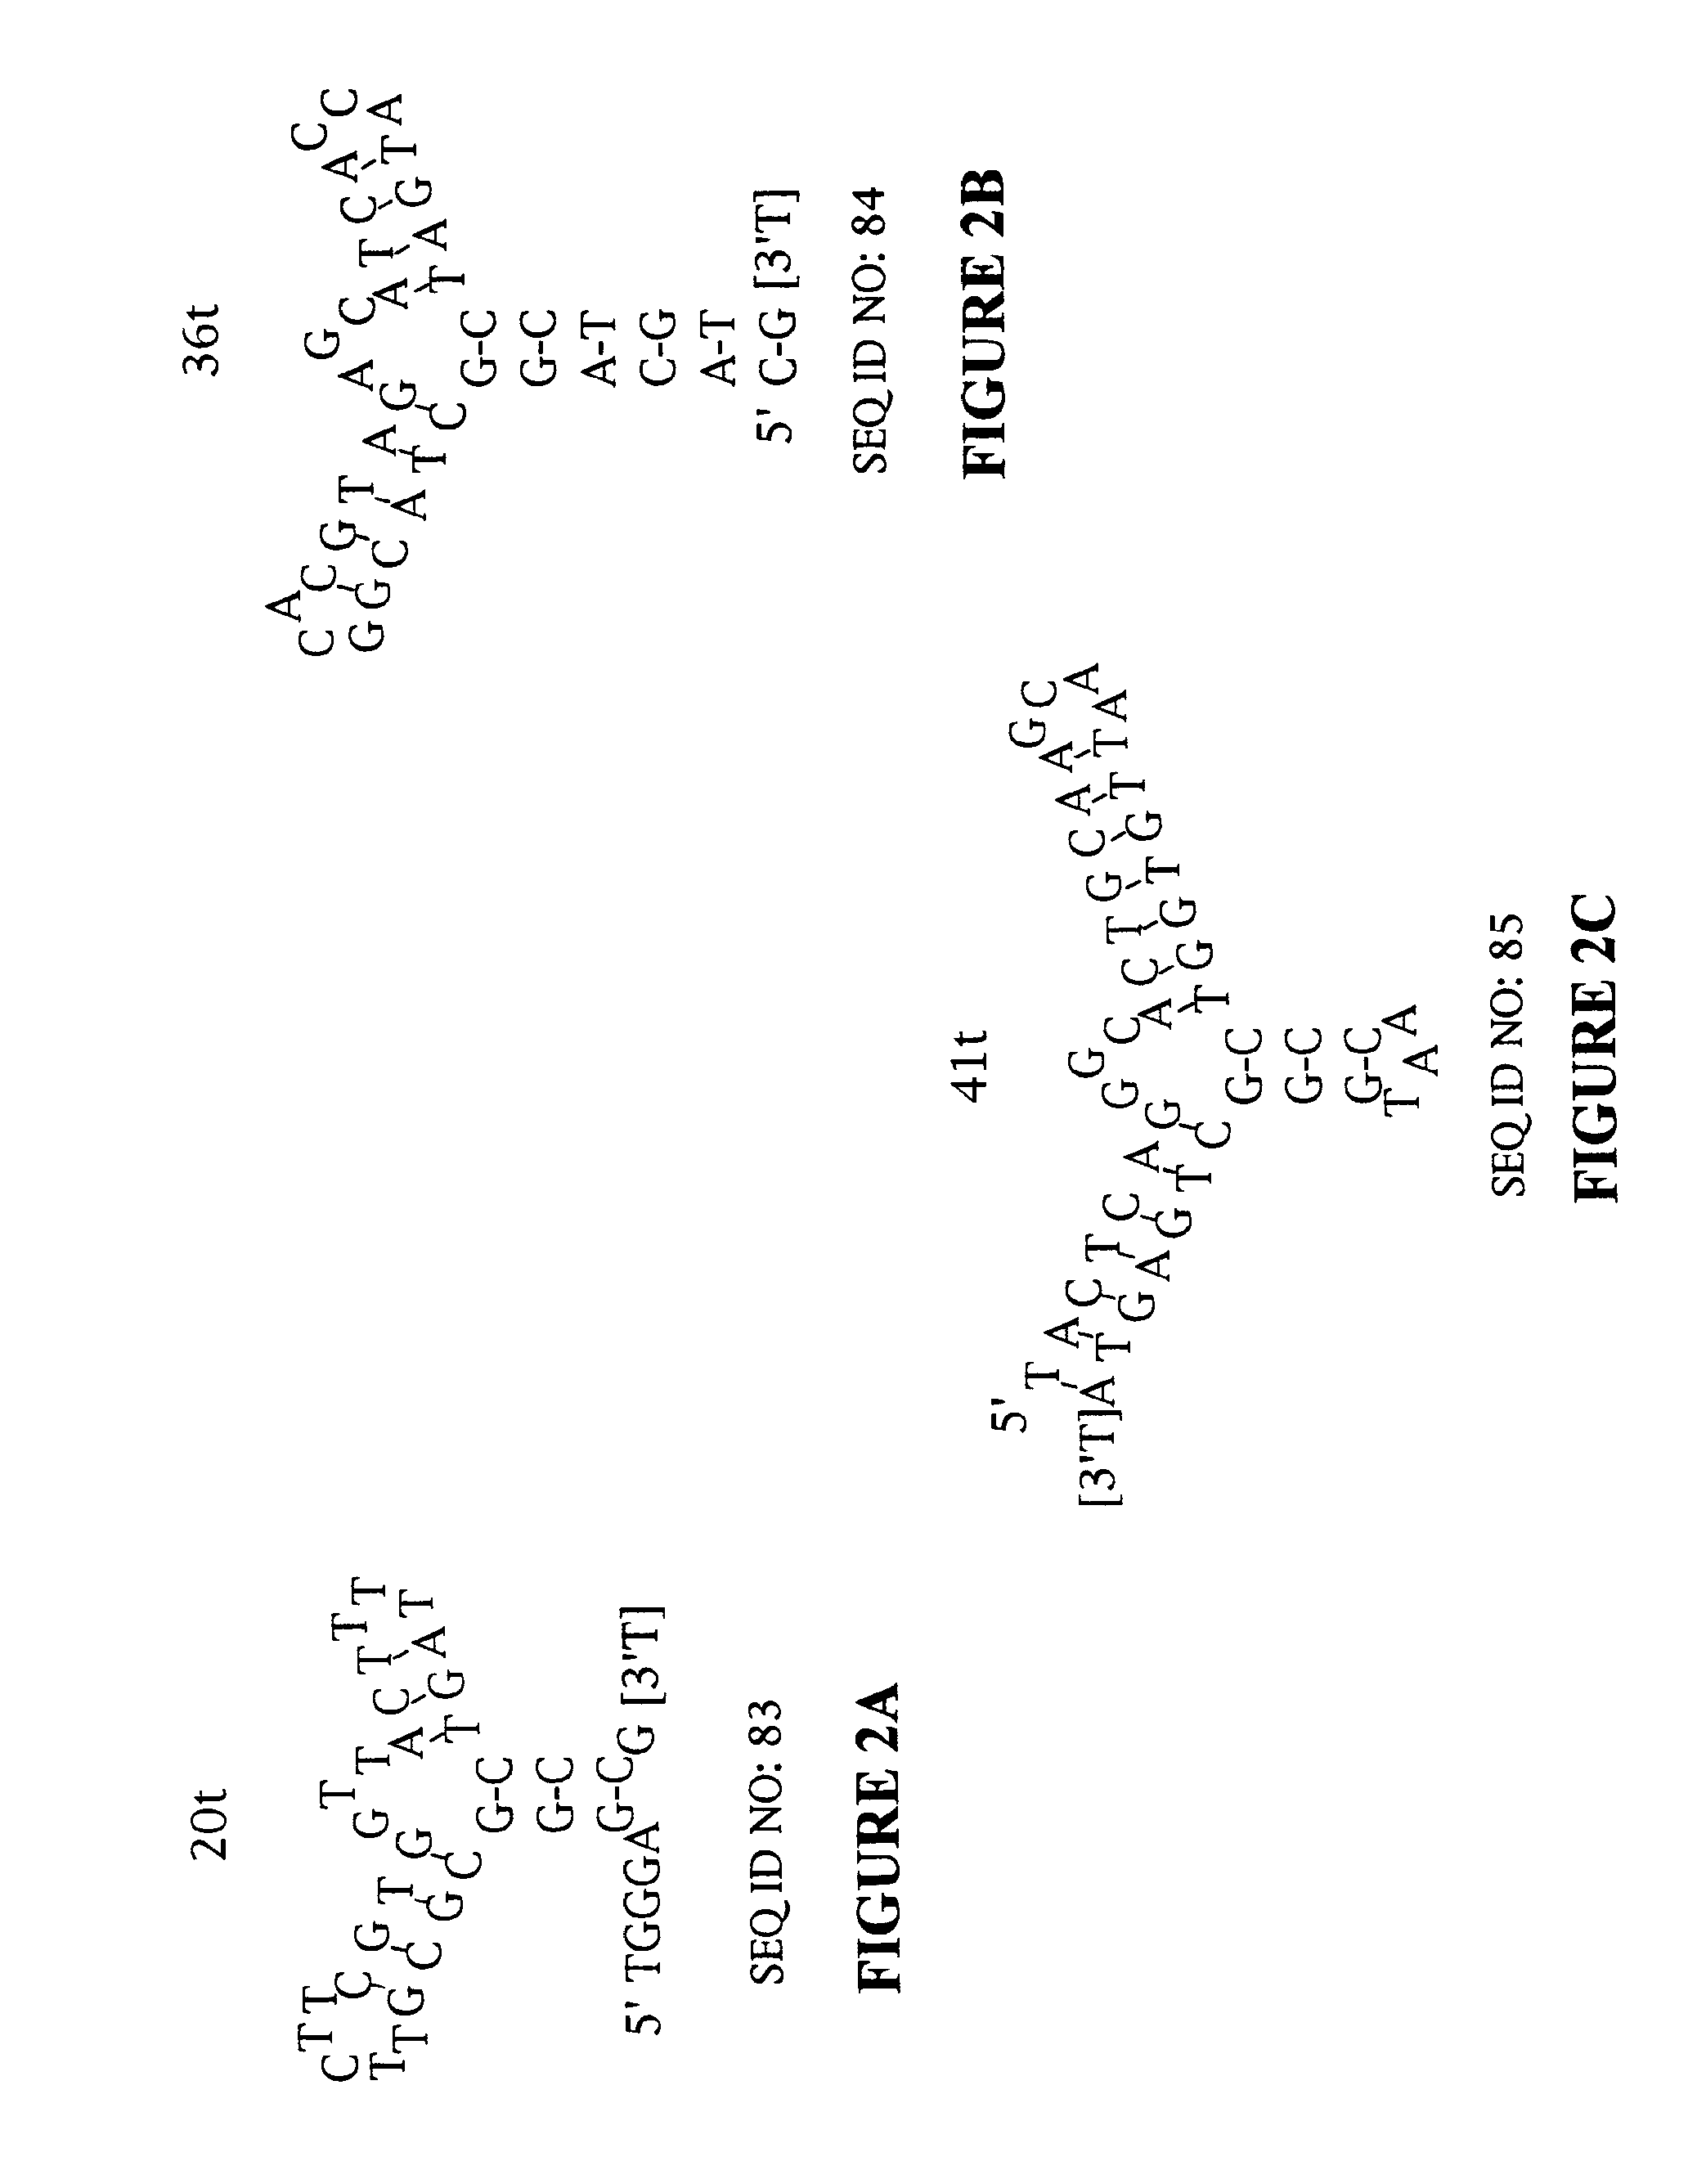 Platelet Derived Growth Factor (PDGF) Nucleic Acid Ligand Complexes